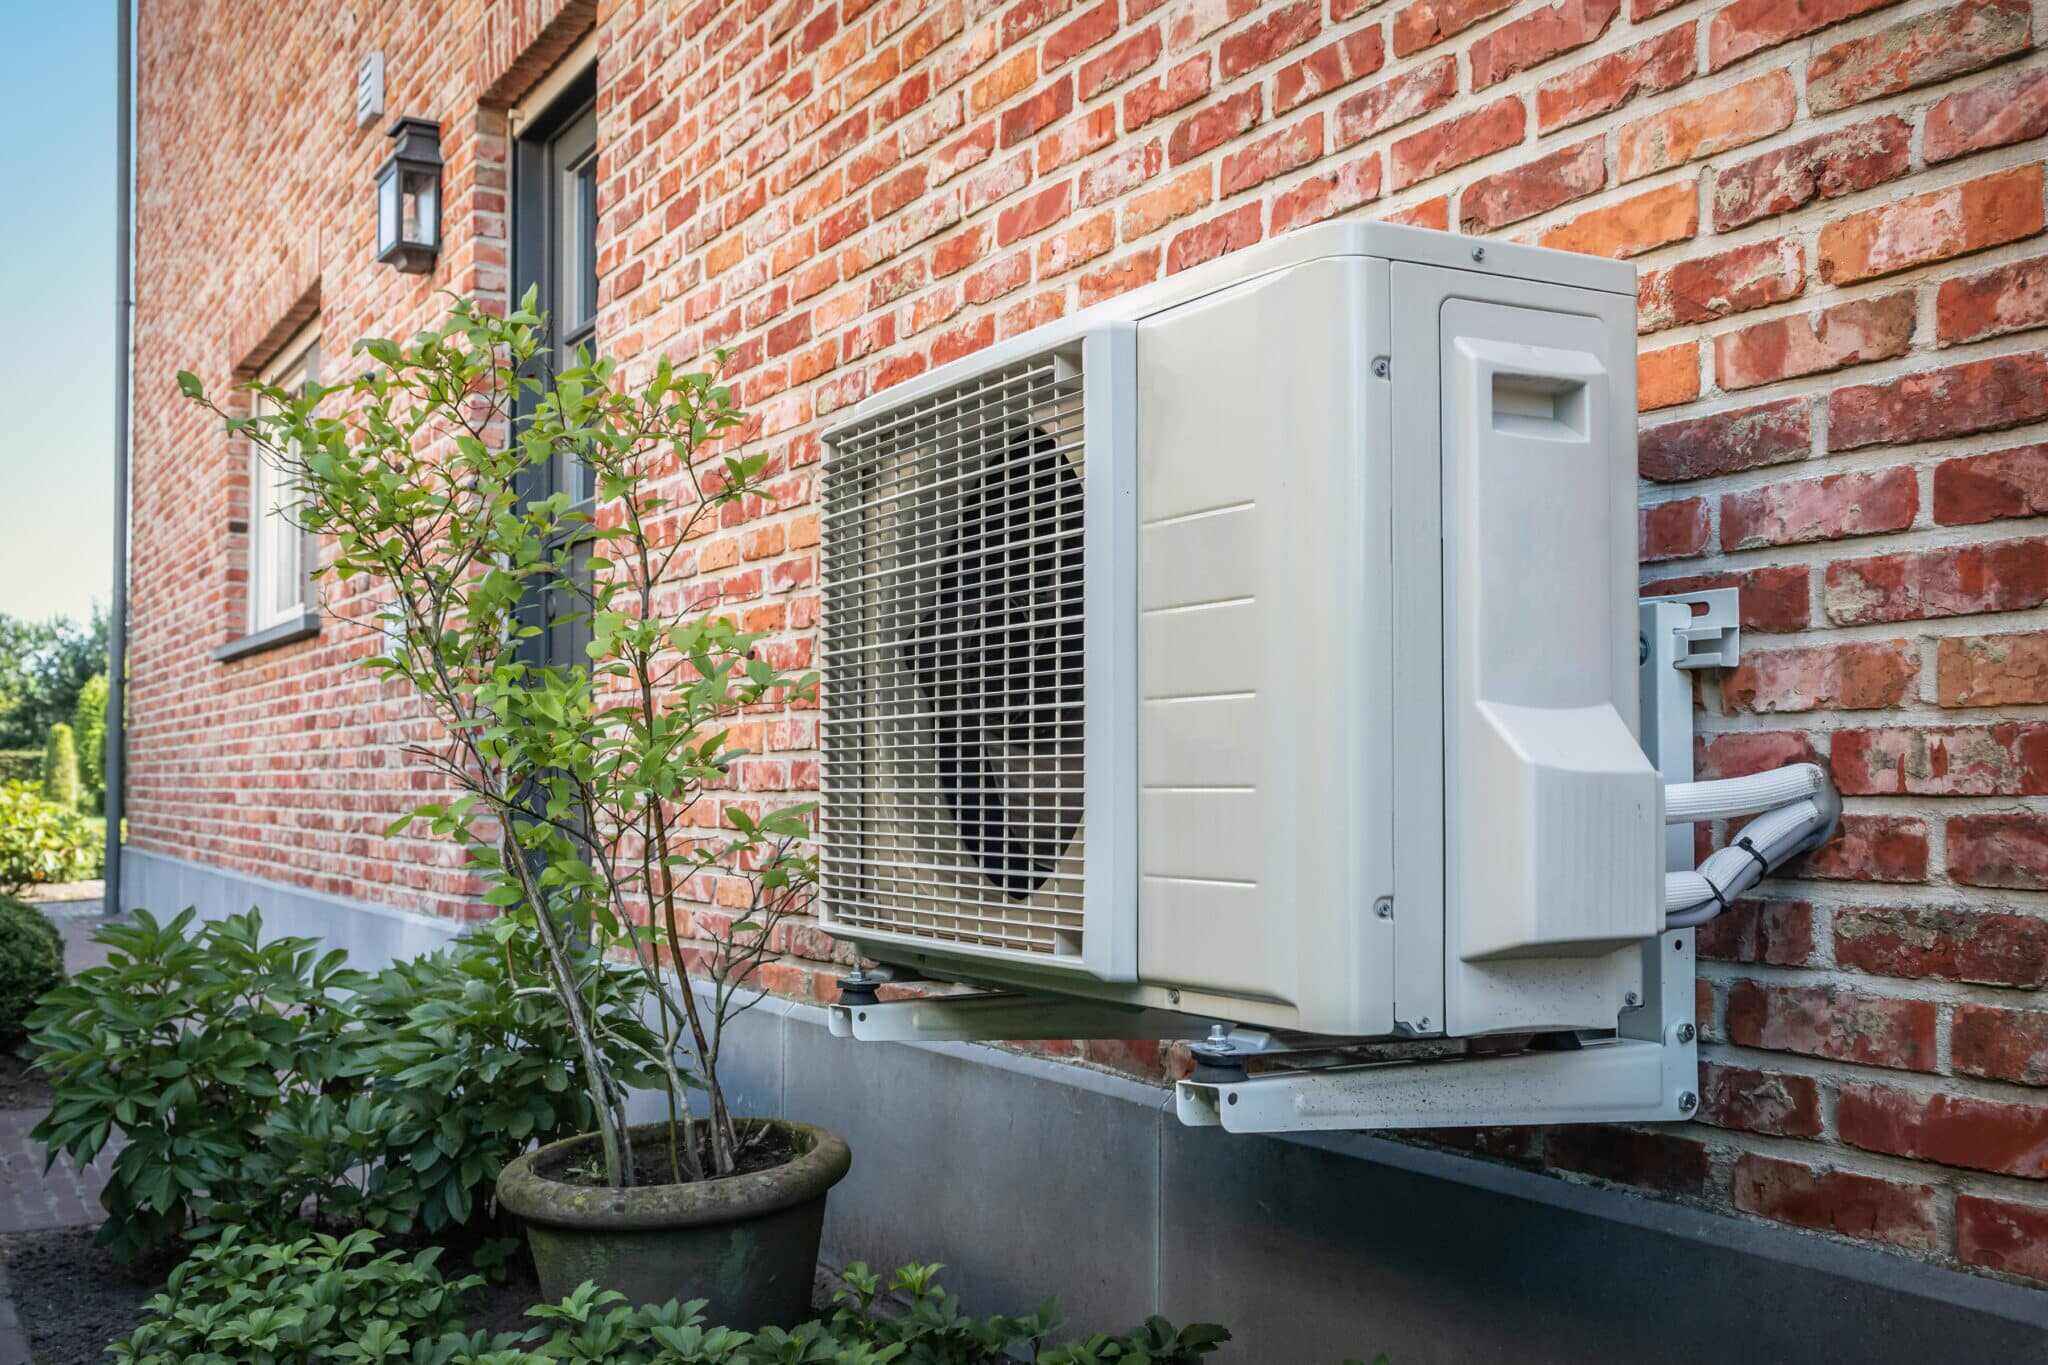 What Is The Outdoor Unit Of A Heat Pump Able To Do During The Heating Cycle?